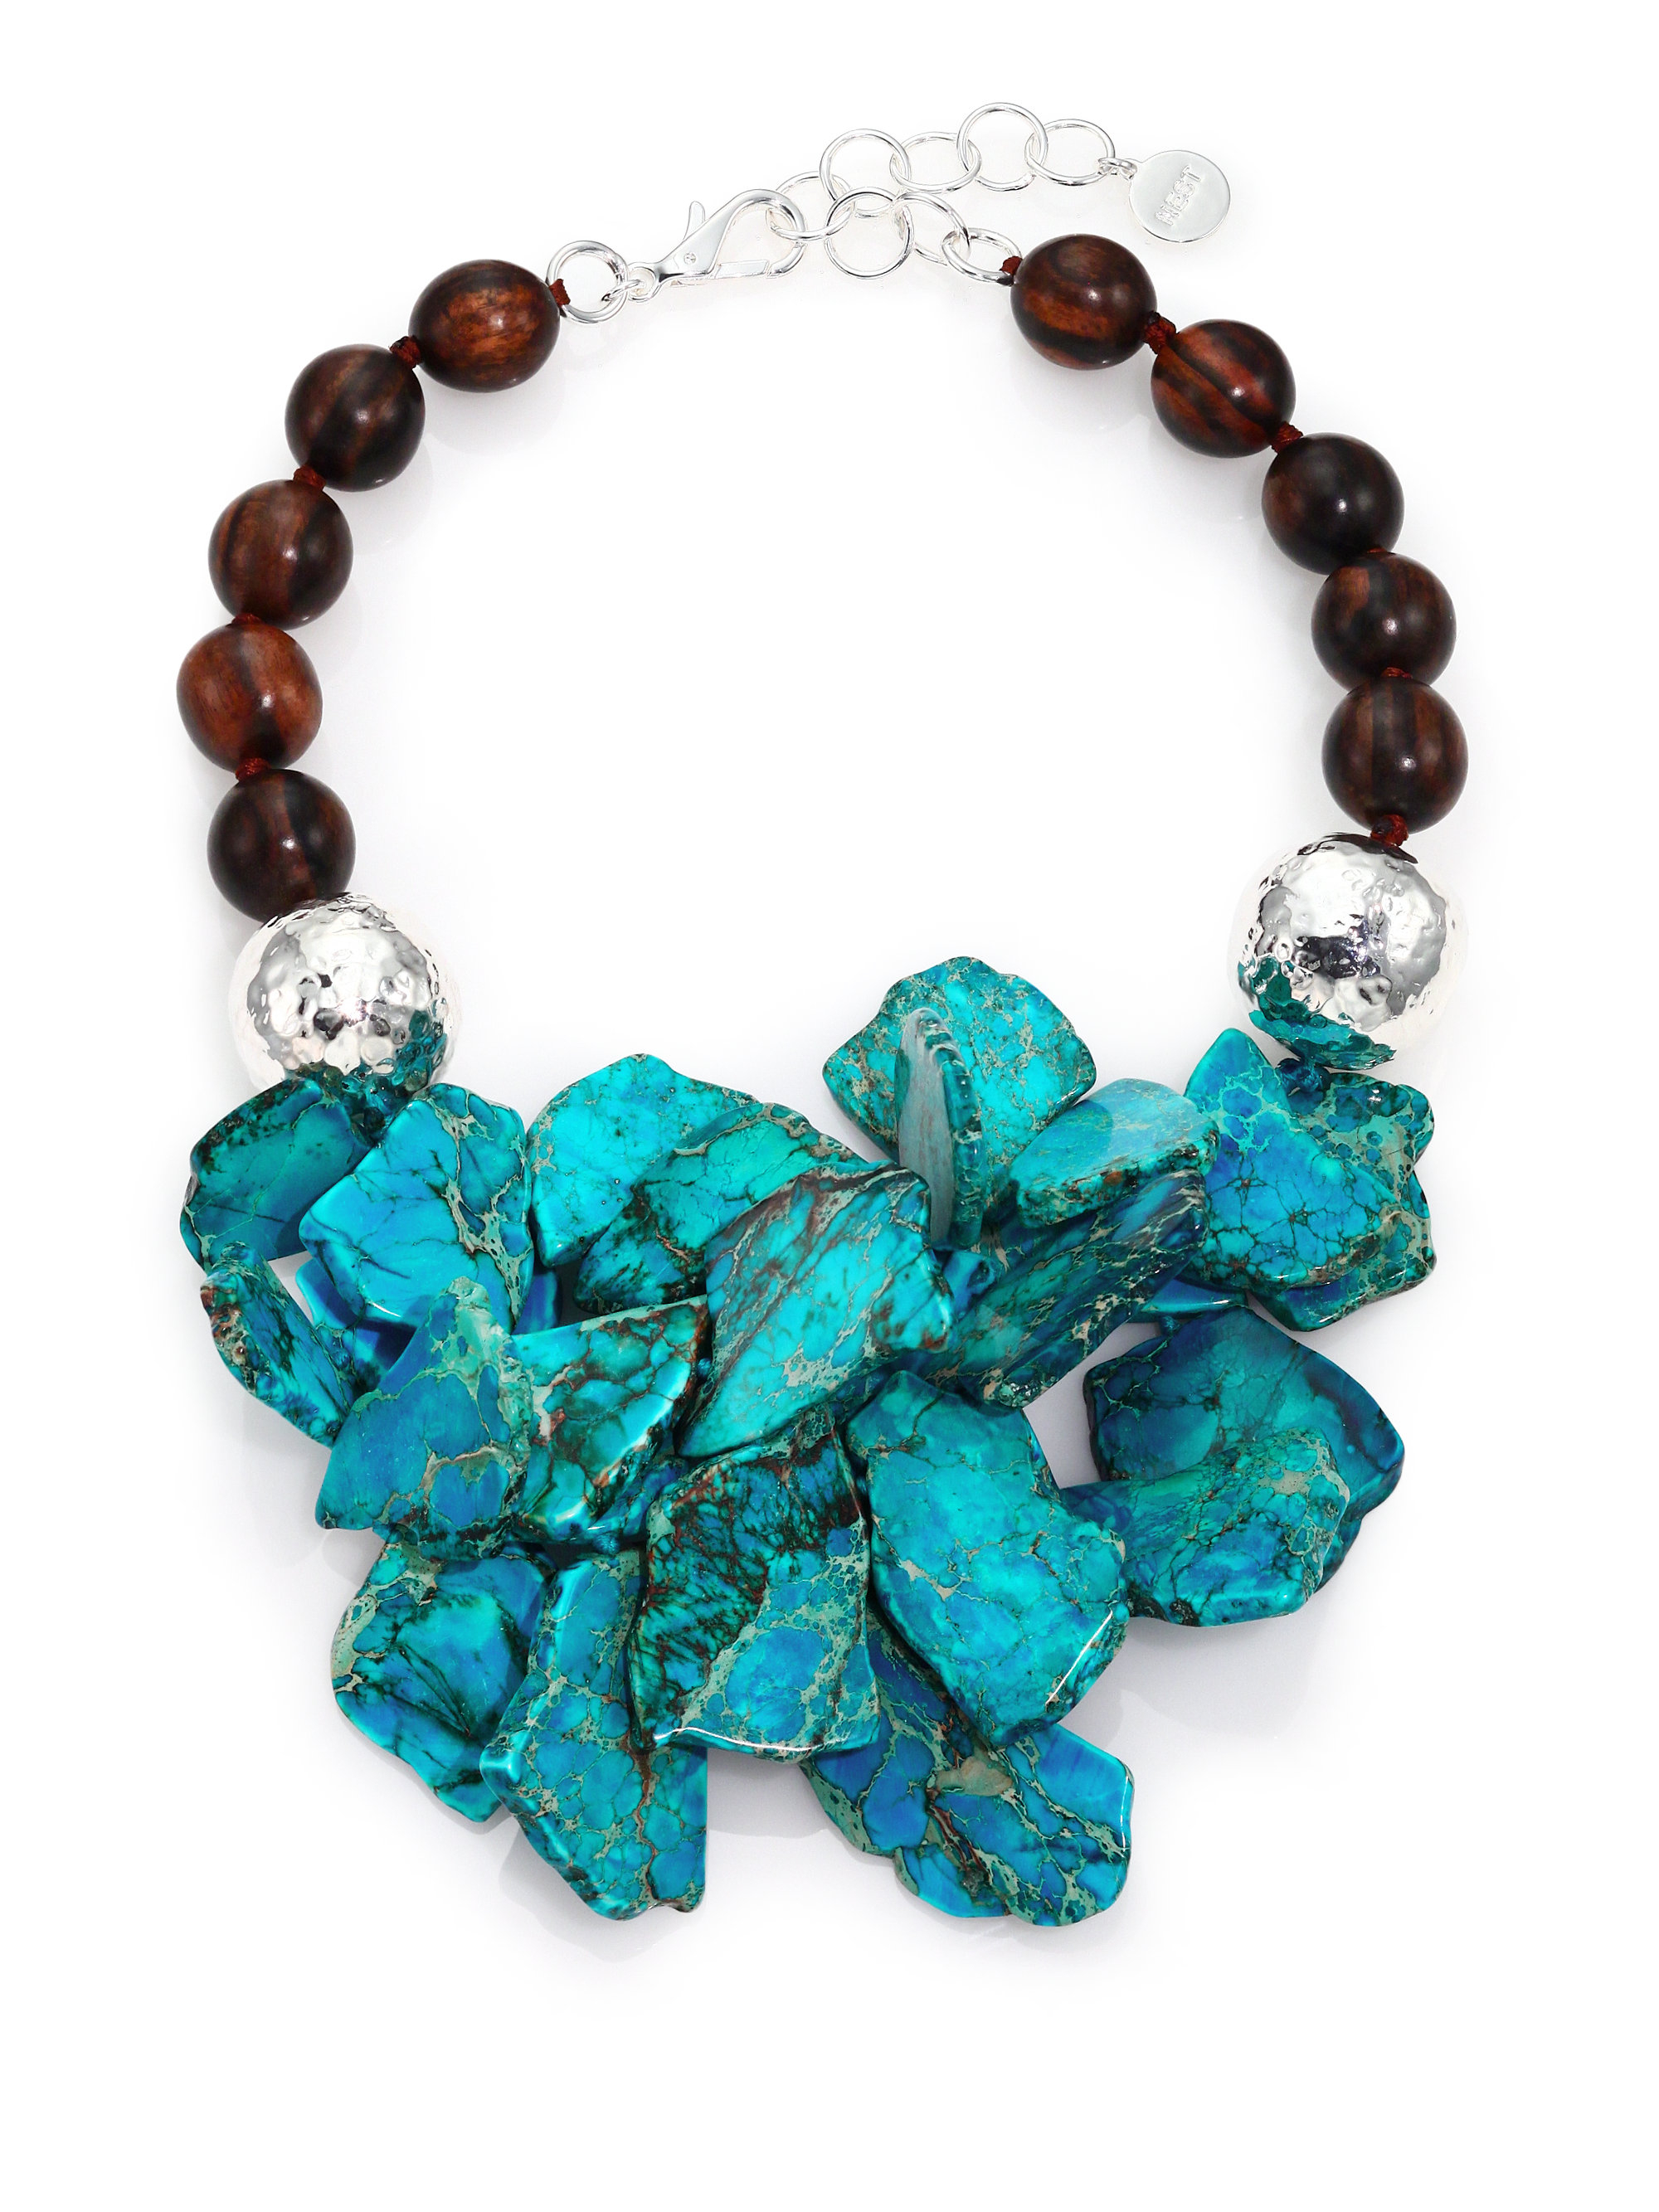 COIRIS Simulated Turquoise Beads Strand Statement Necklace for Women with Earrings N0037Blue 